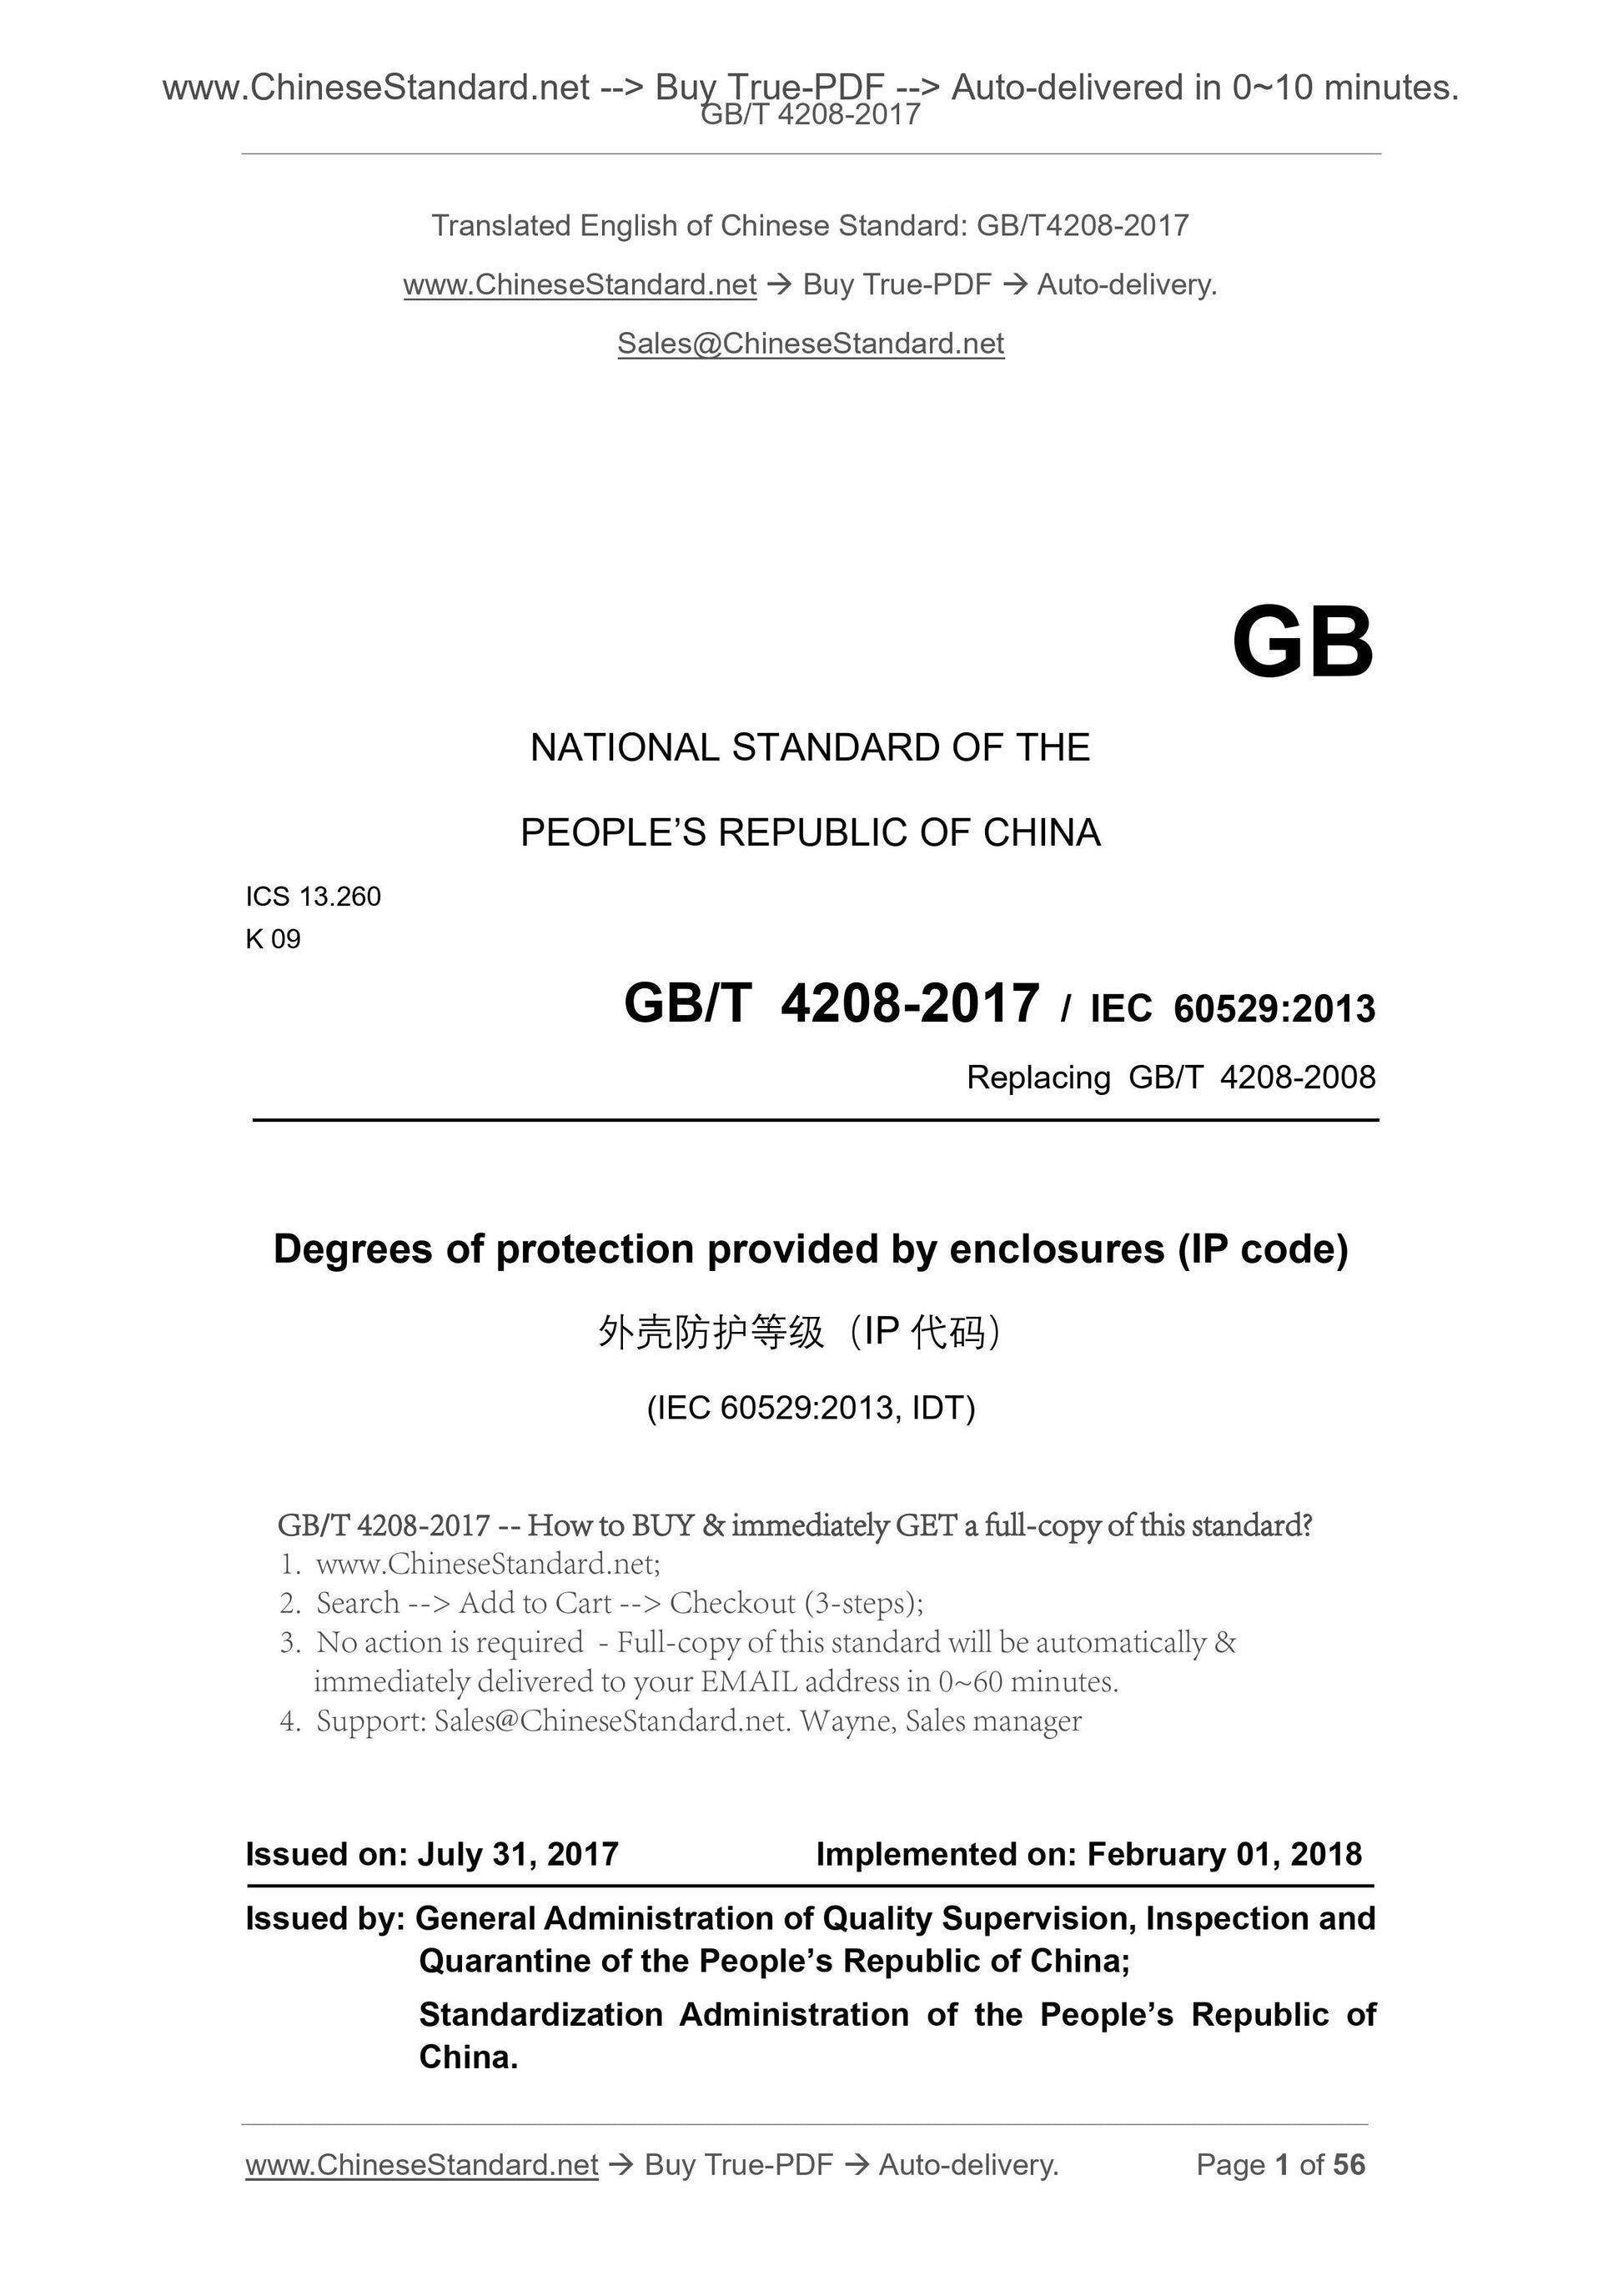 GB/T 4208-2017 Page 1